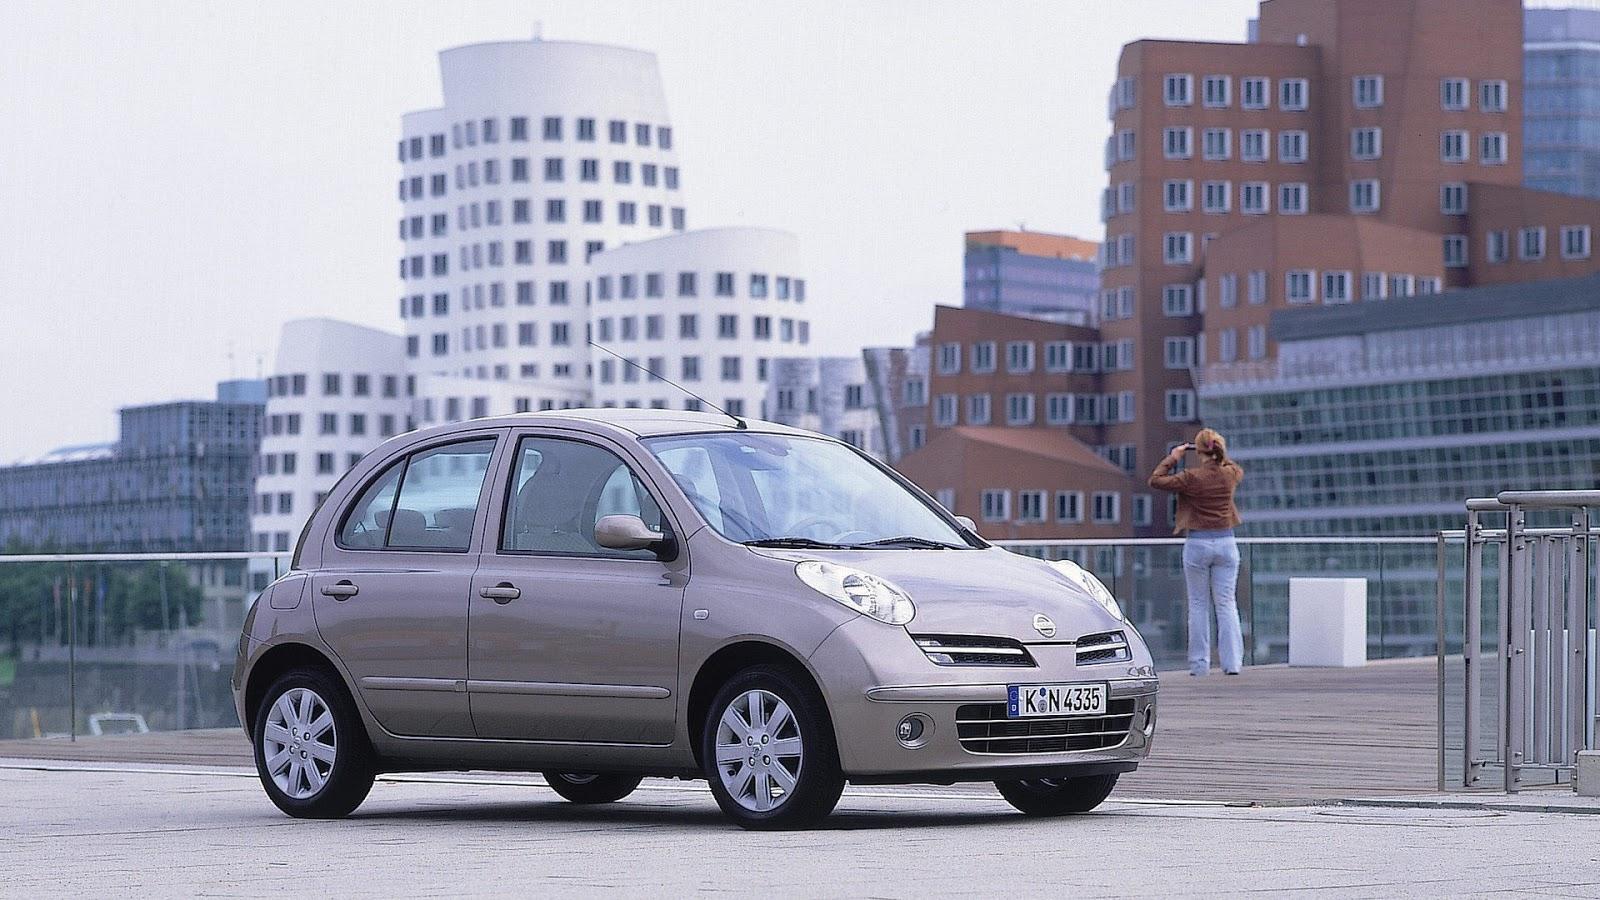 Wallpaper of beautiful cars: Nissan Micra aka Nissan March or